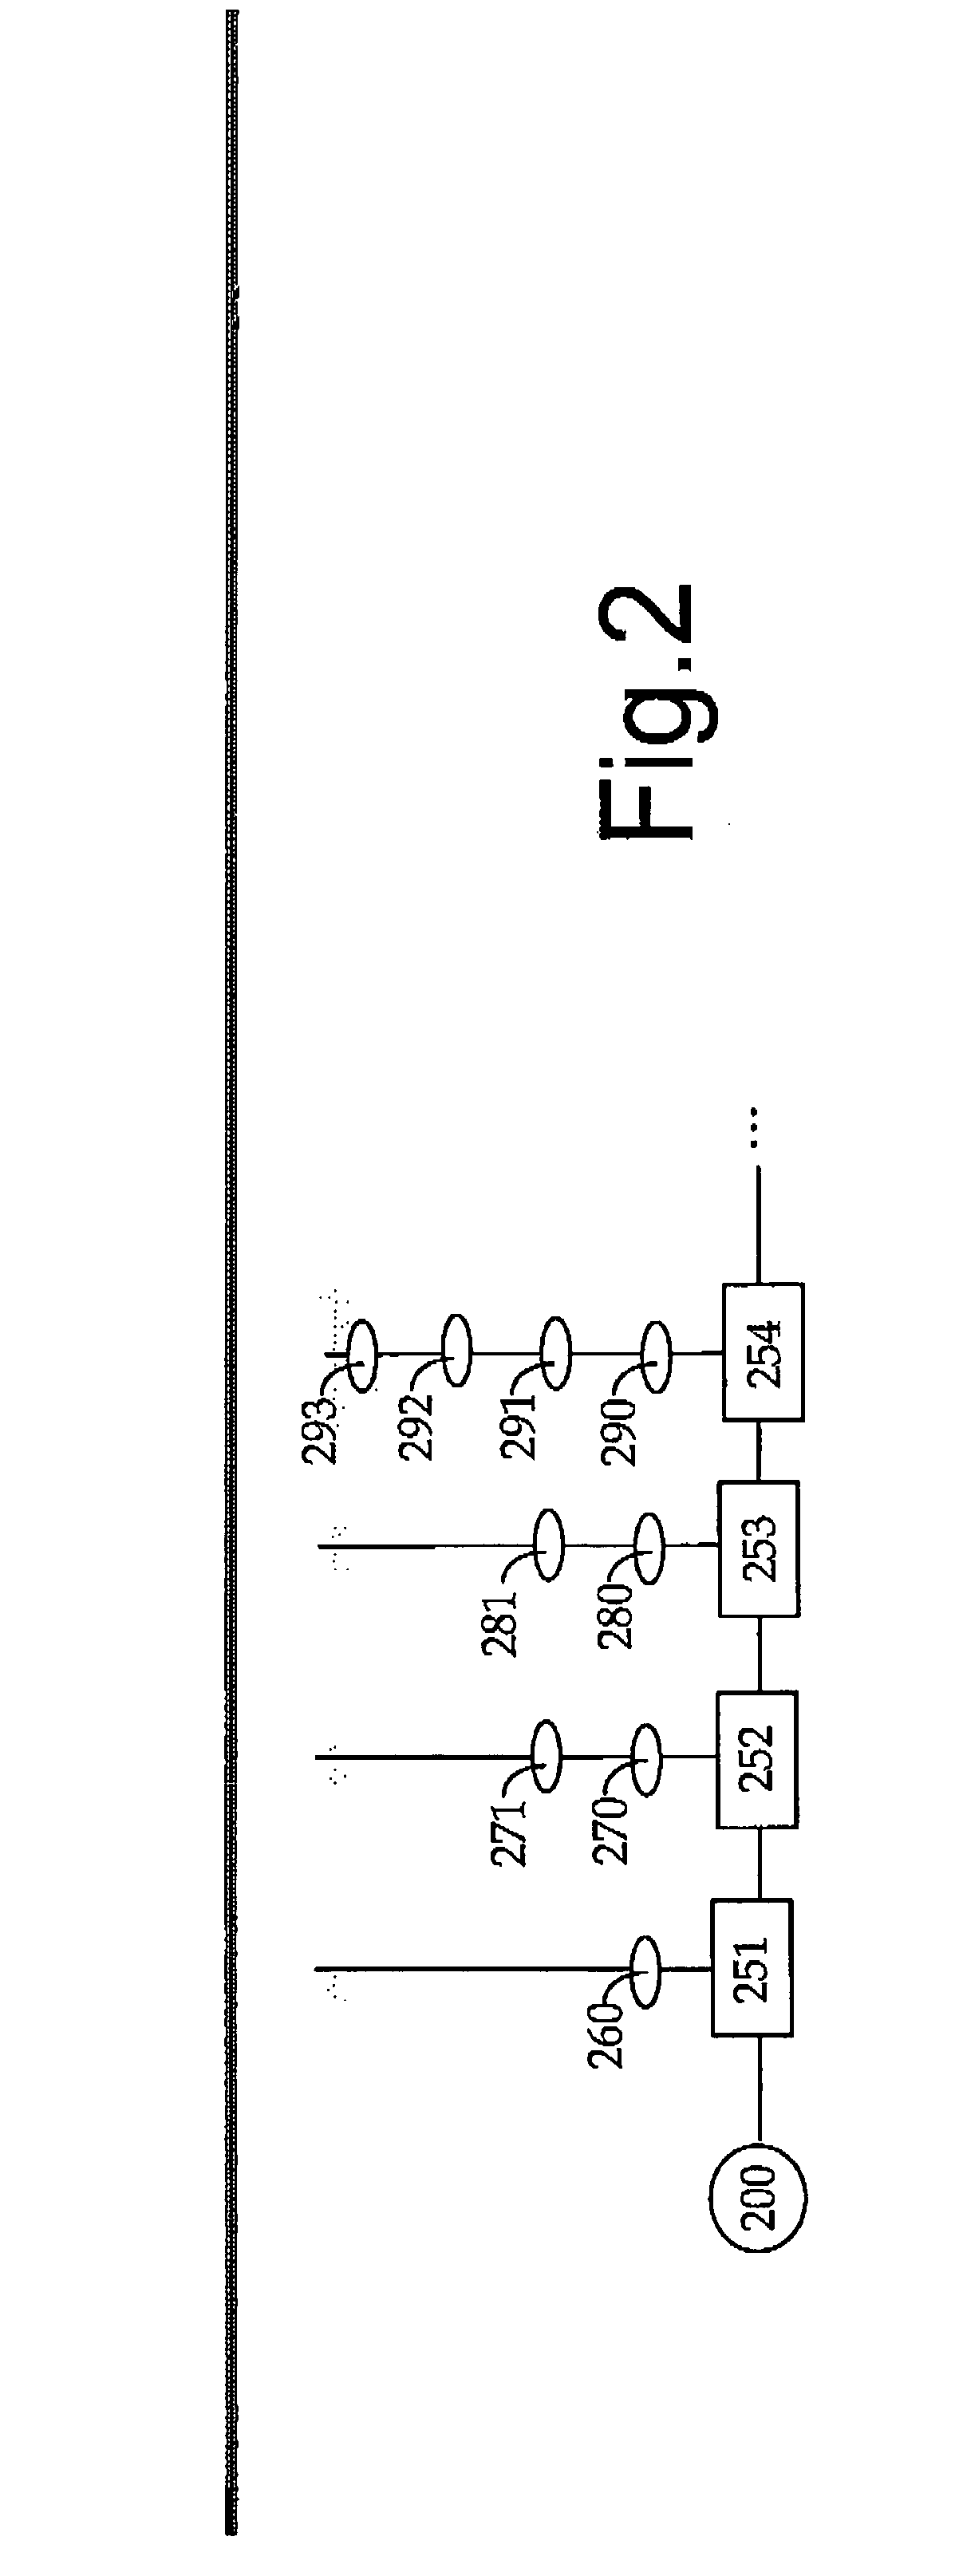 Forming of a data retrieval, searching from a data retrieval system, and a data retrieval system